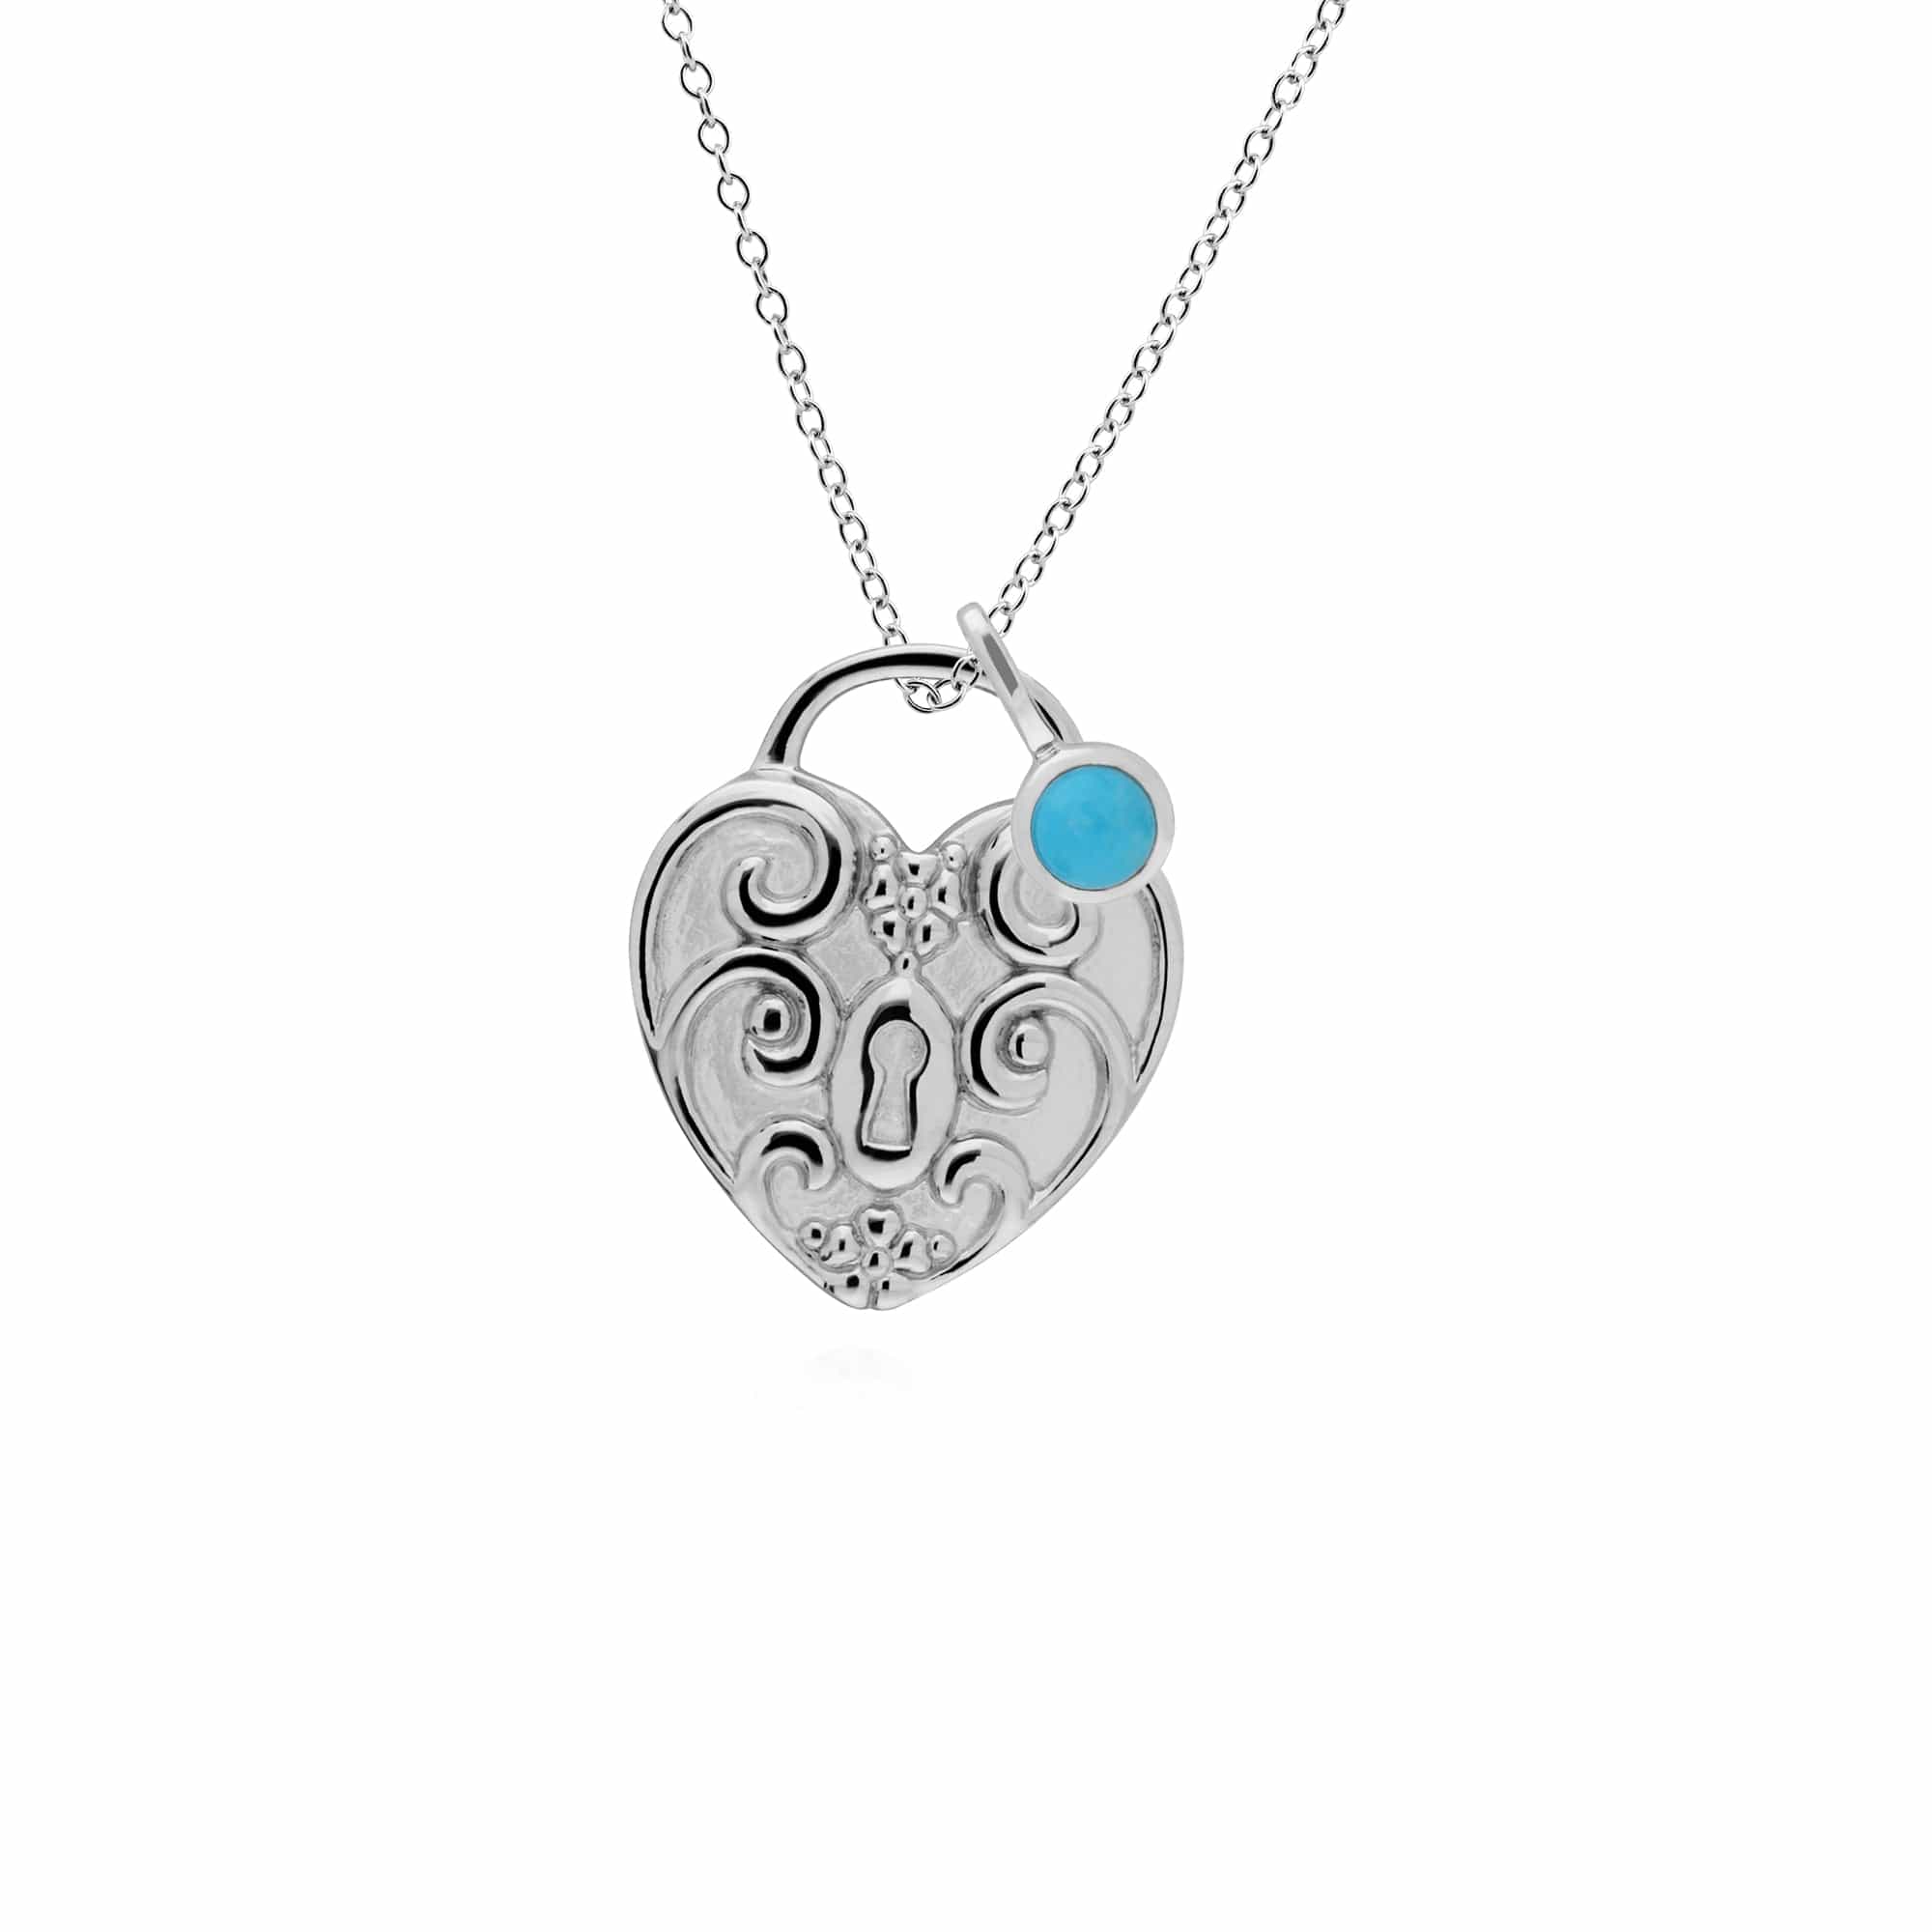 270P026001925-270P026601925 Classic Swirl Heart Lock Pendant & Turquoise Charm in 925 Sterling Silver 1